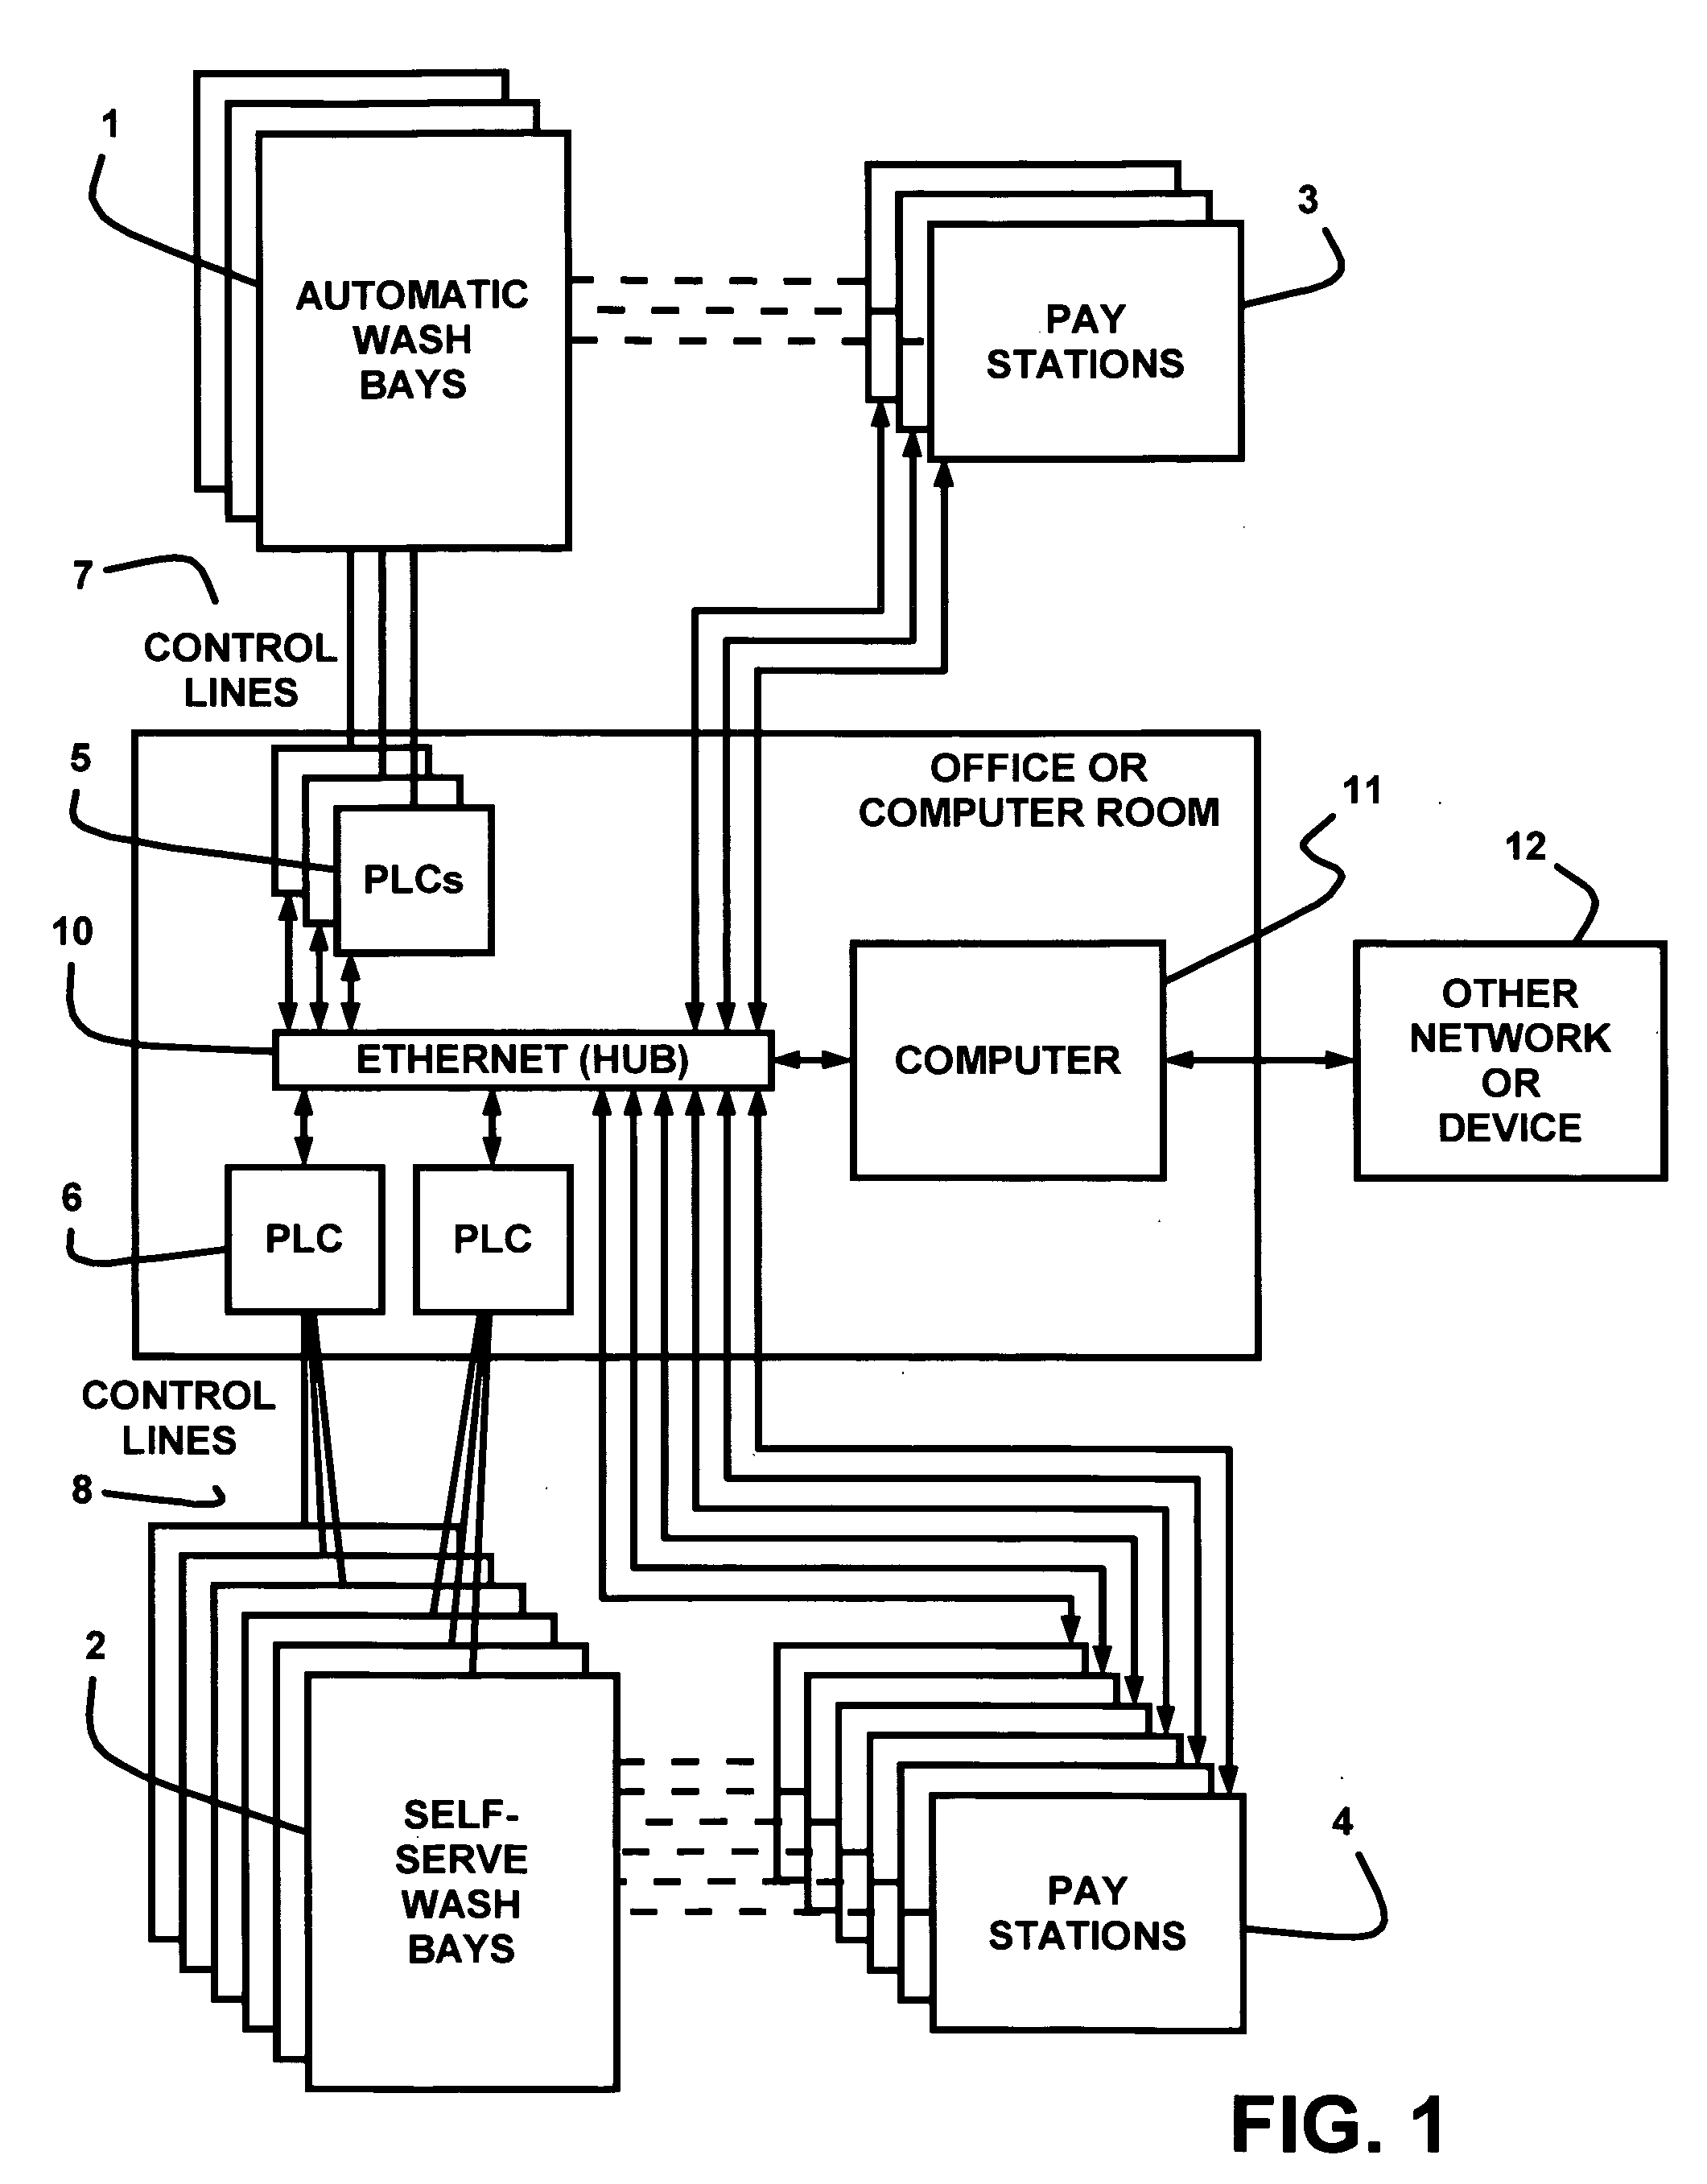 Vehicle wash control system